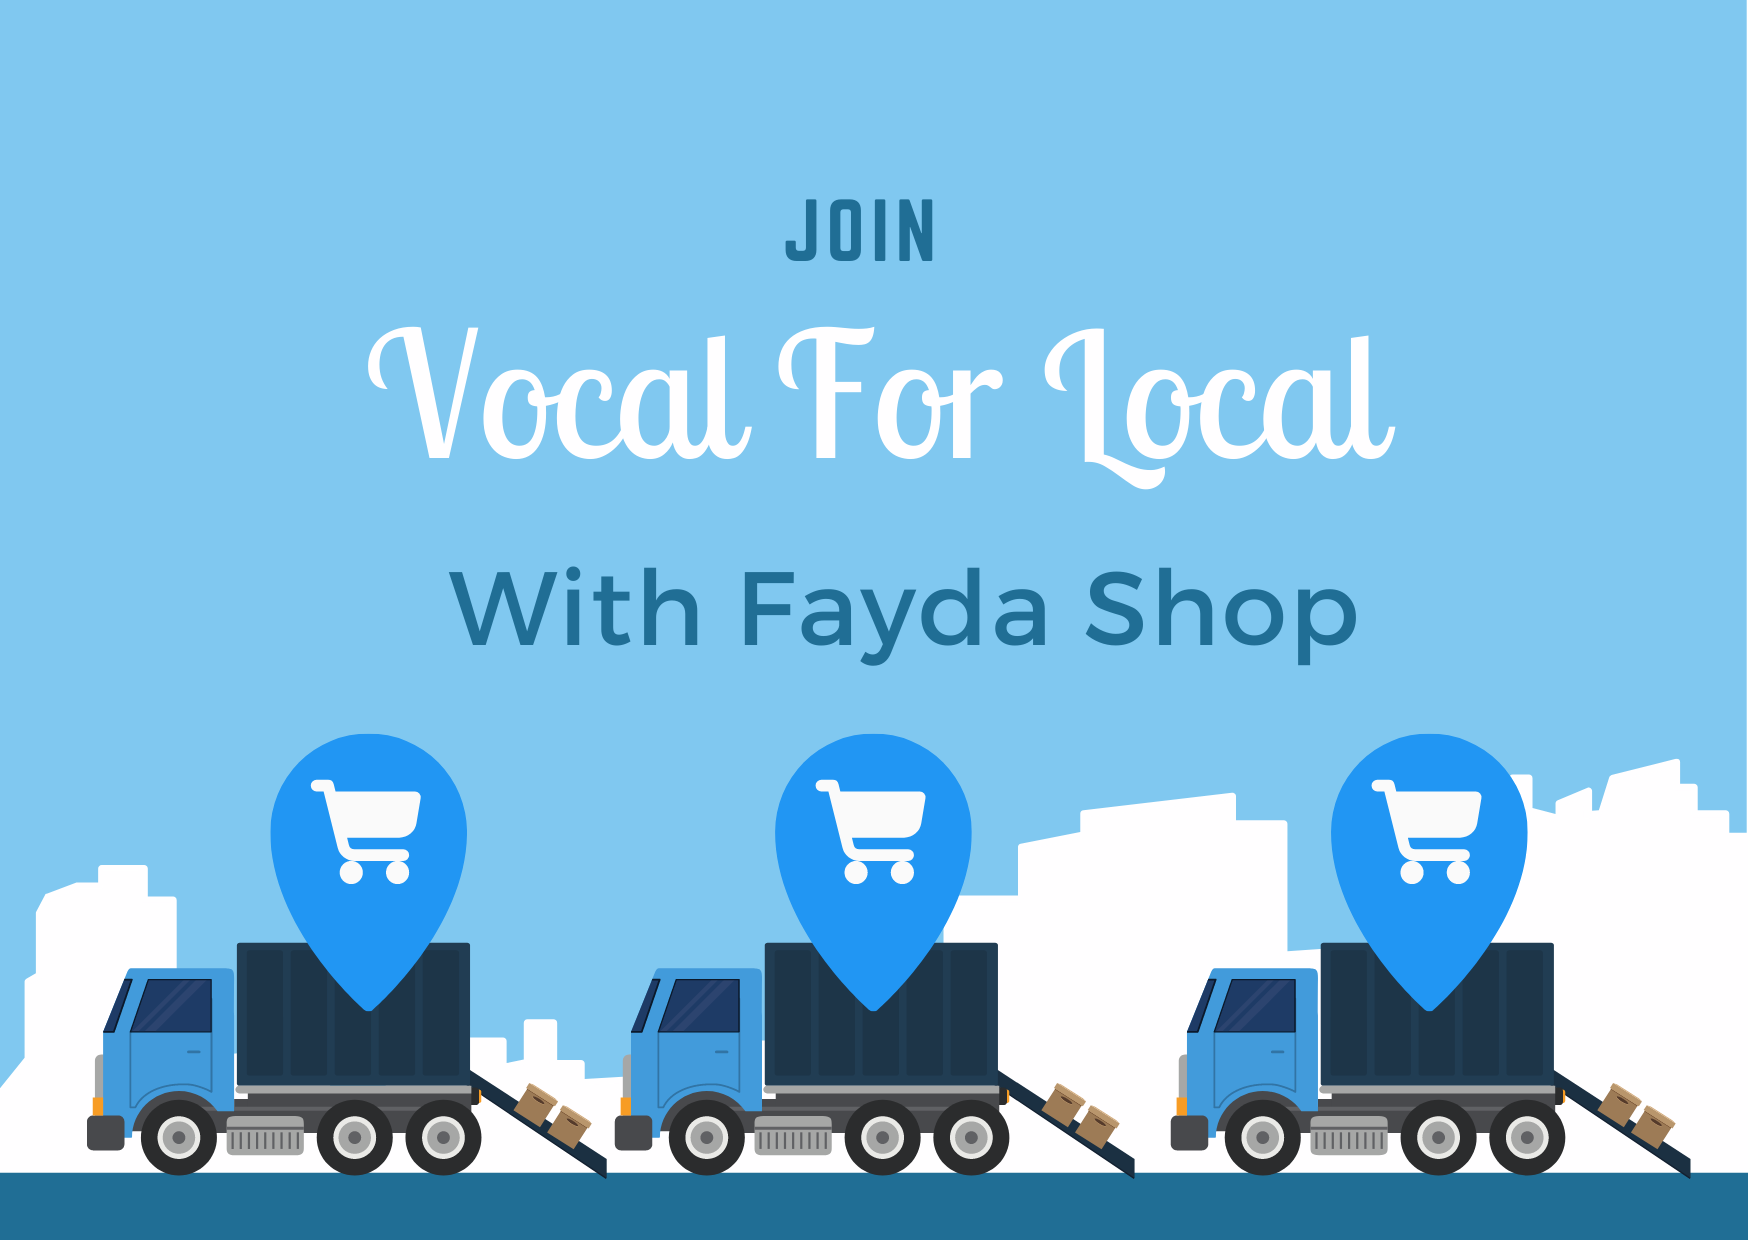 Know Us More – Fayda Shop